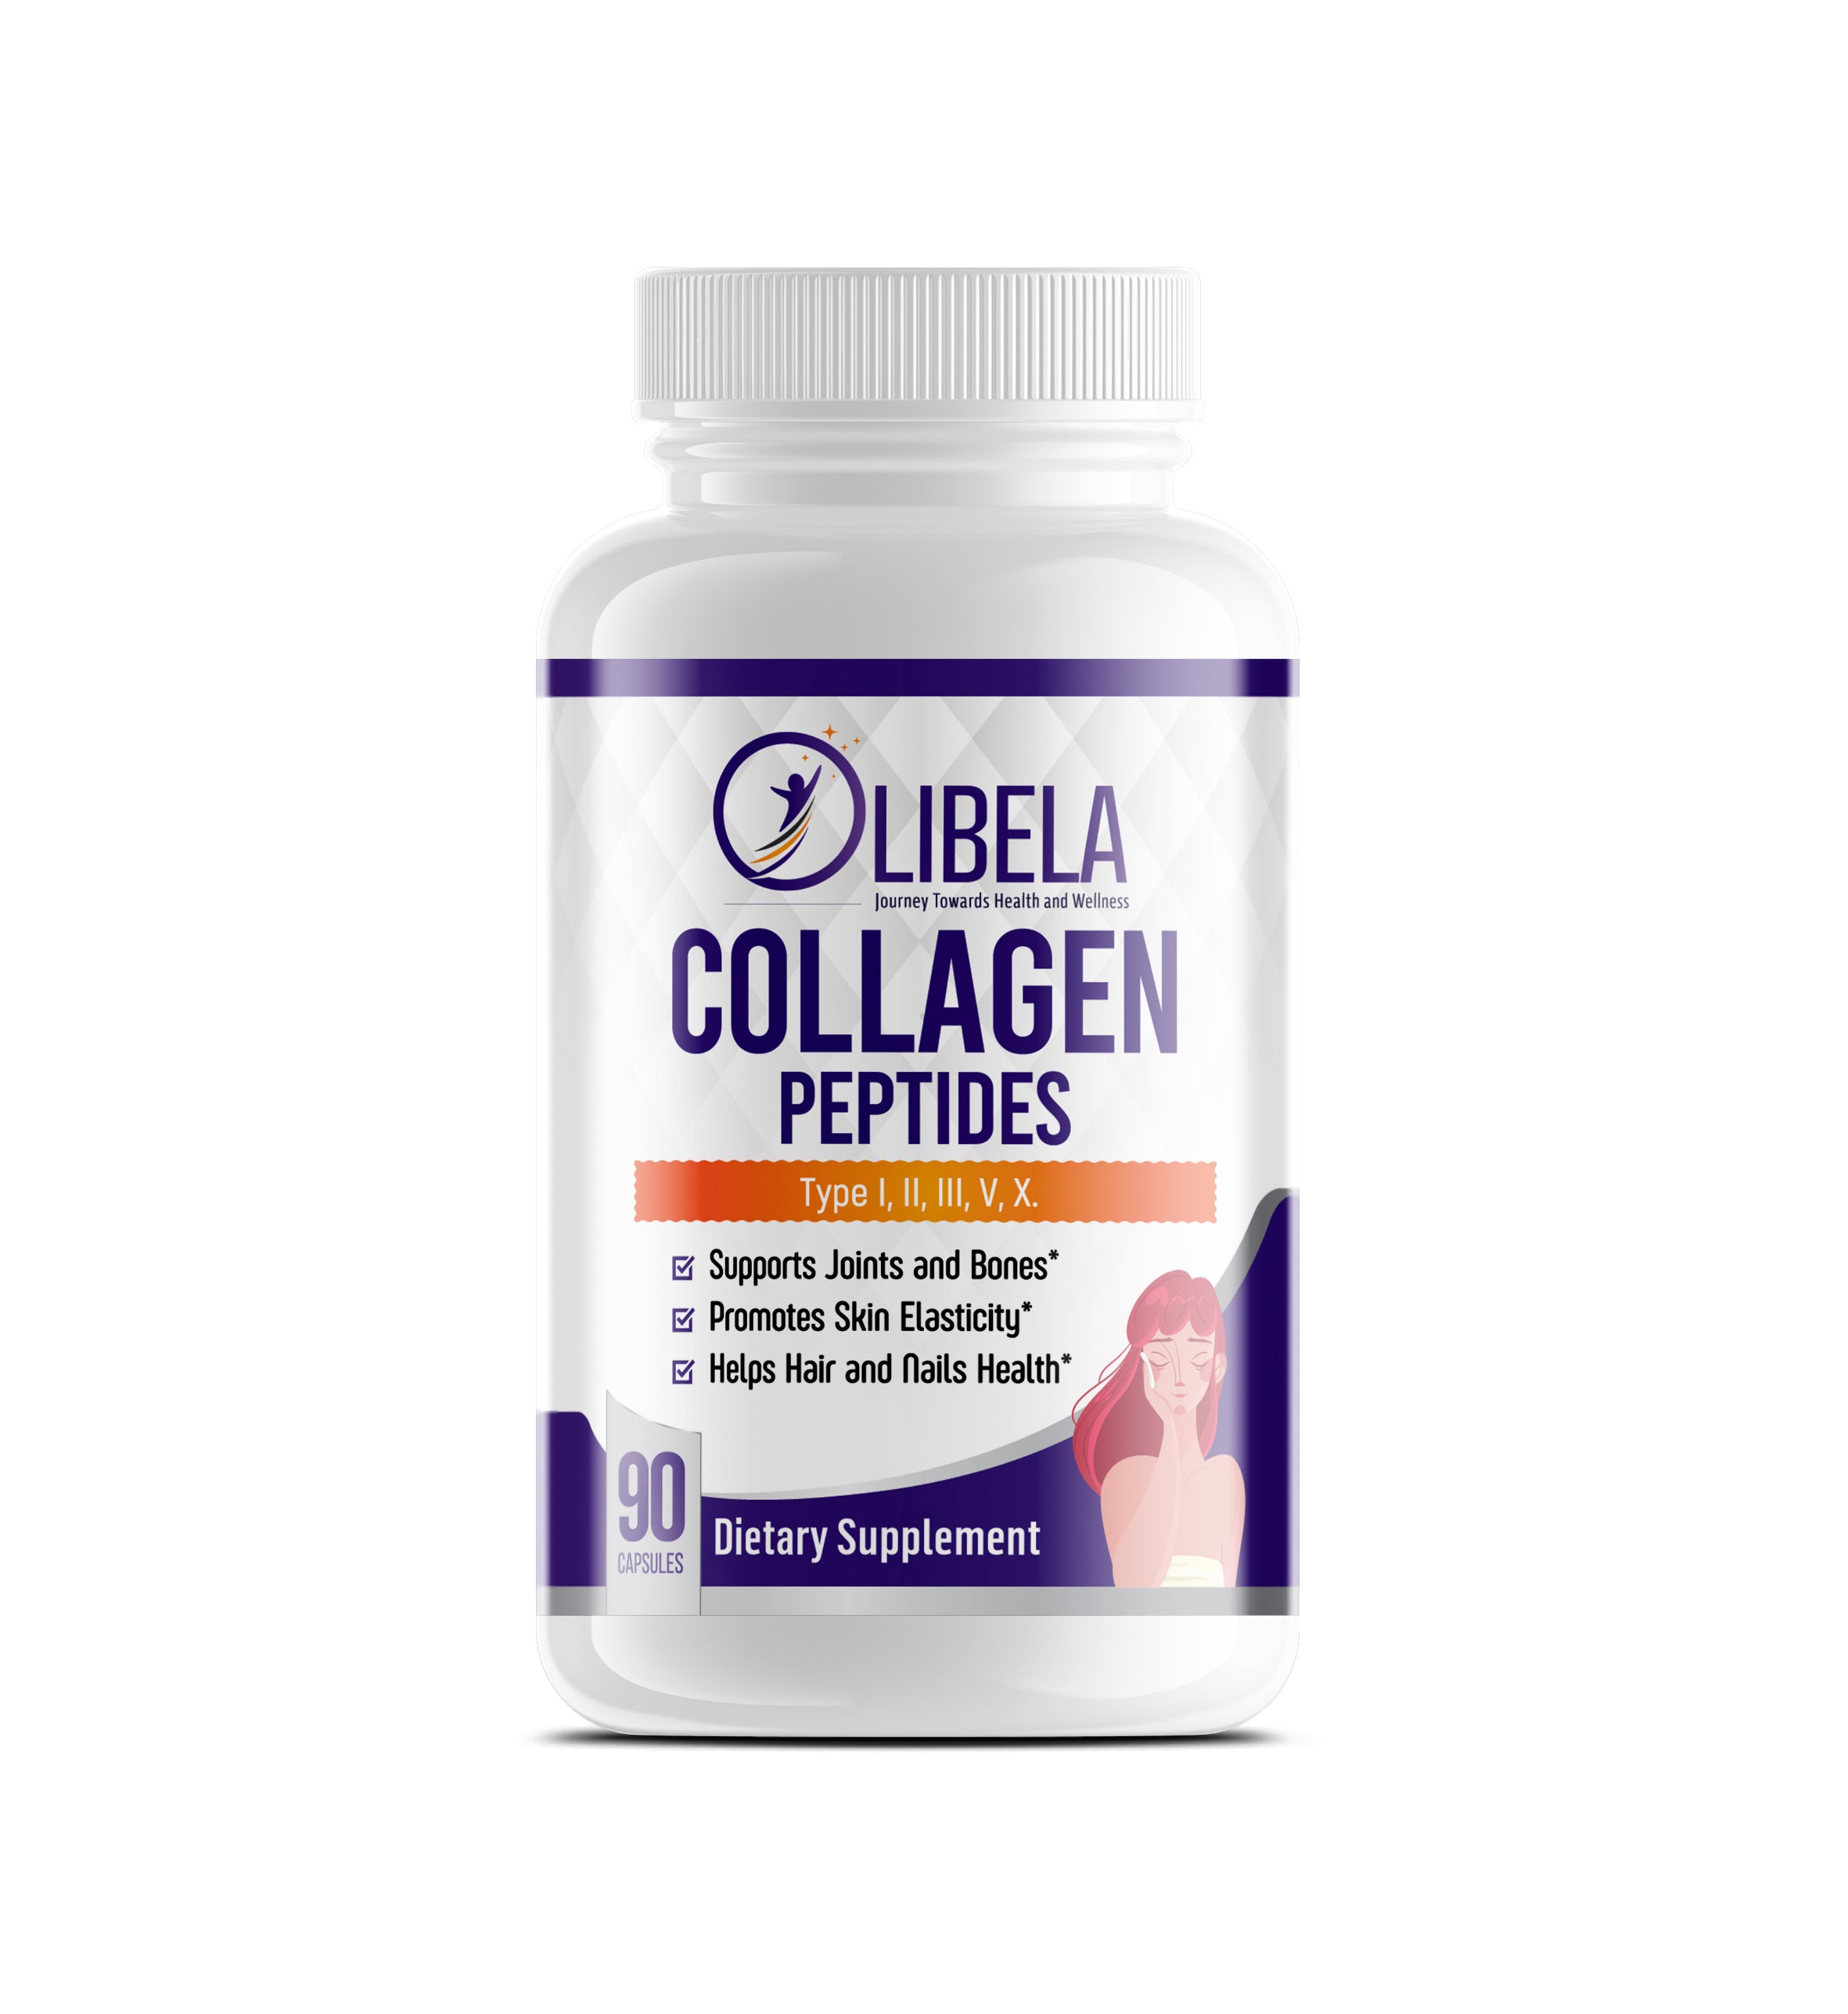 Collagen Peptides Type I, II, III, V & X - Supports Skin Elasticity, Hair Growth, Skin Hydration, Joint Health, Cardiovascular Health, Digestive Health, Dental Health, and Wound Healing, 90 Caps.